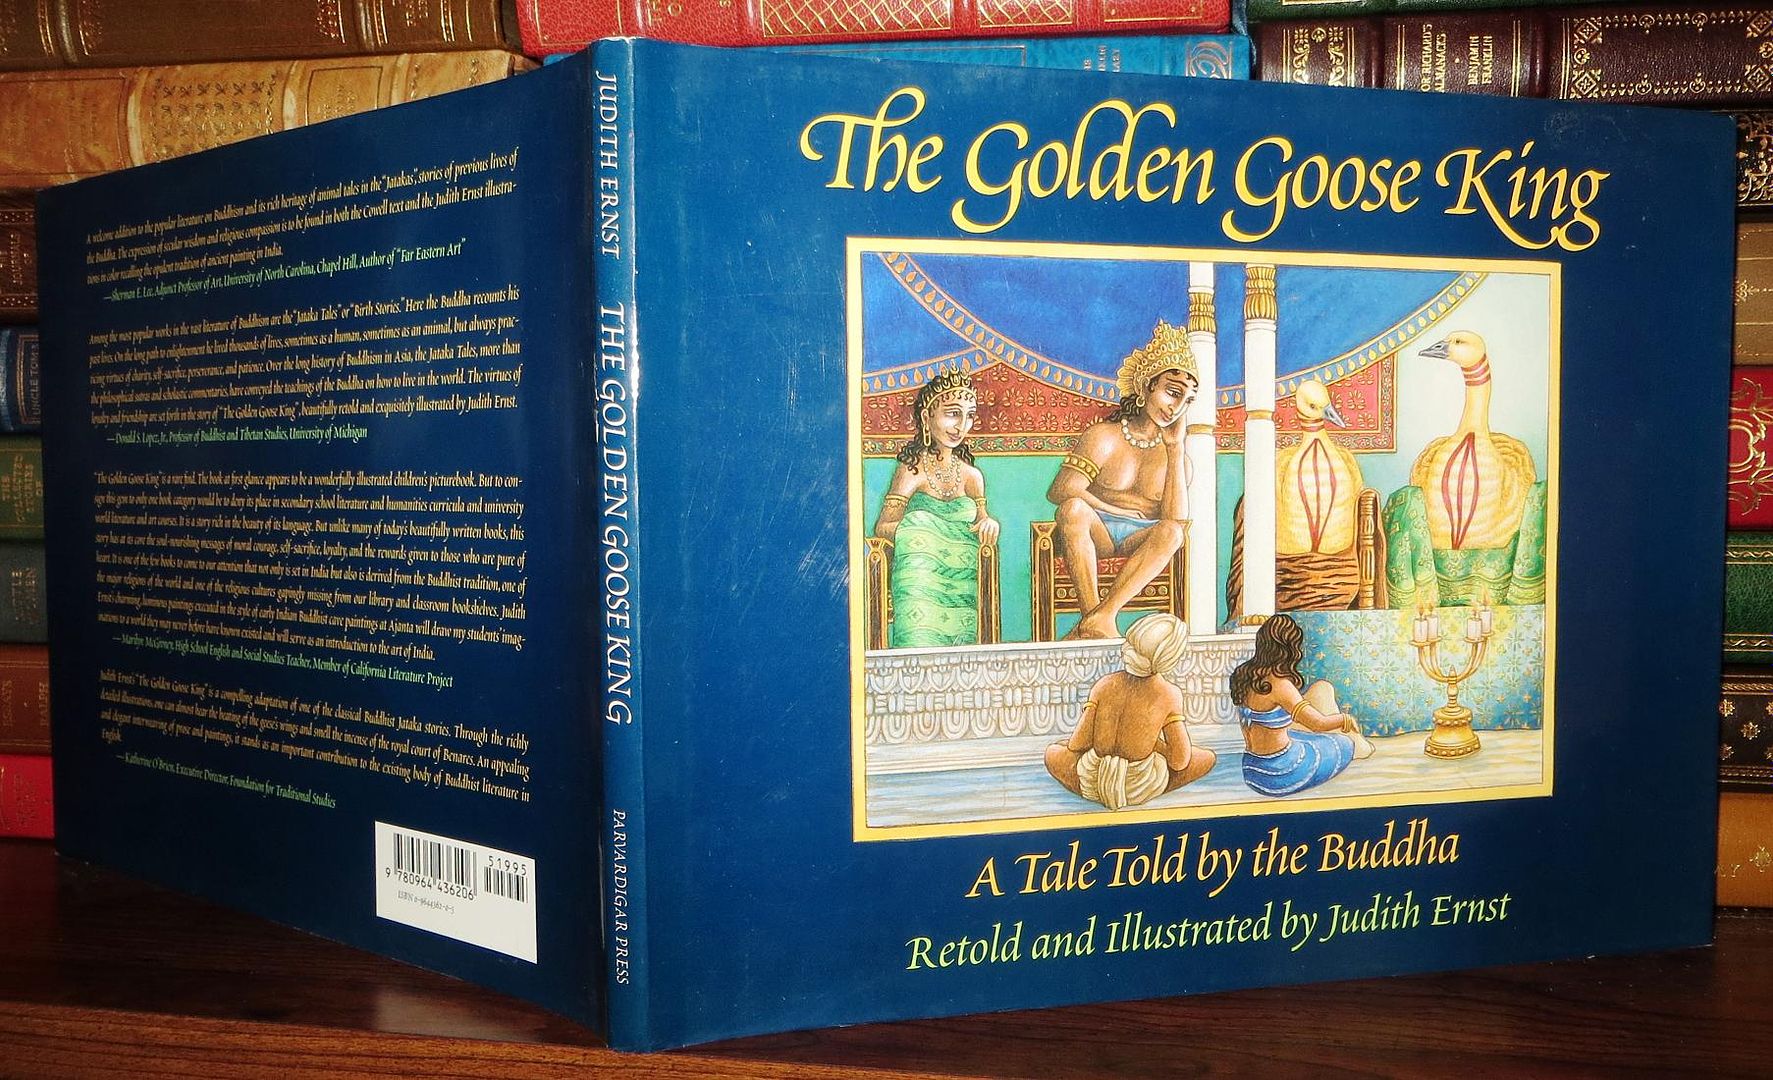 ERNST, JUDITH - The Golden Goose King a Tale Told by the Buddha